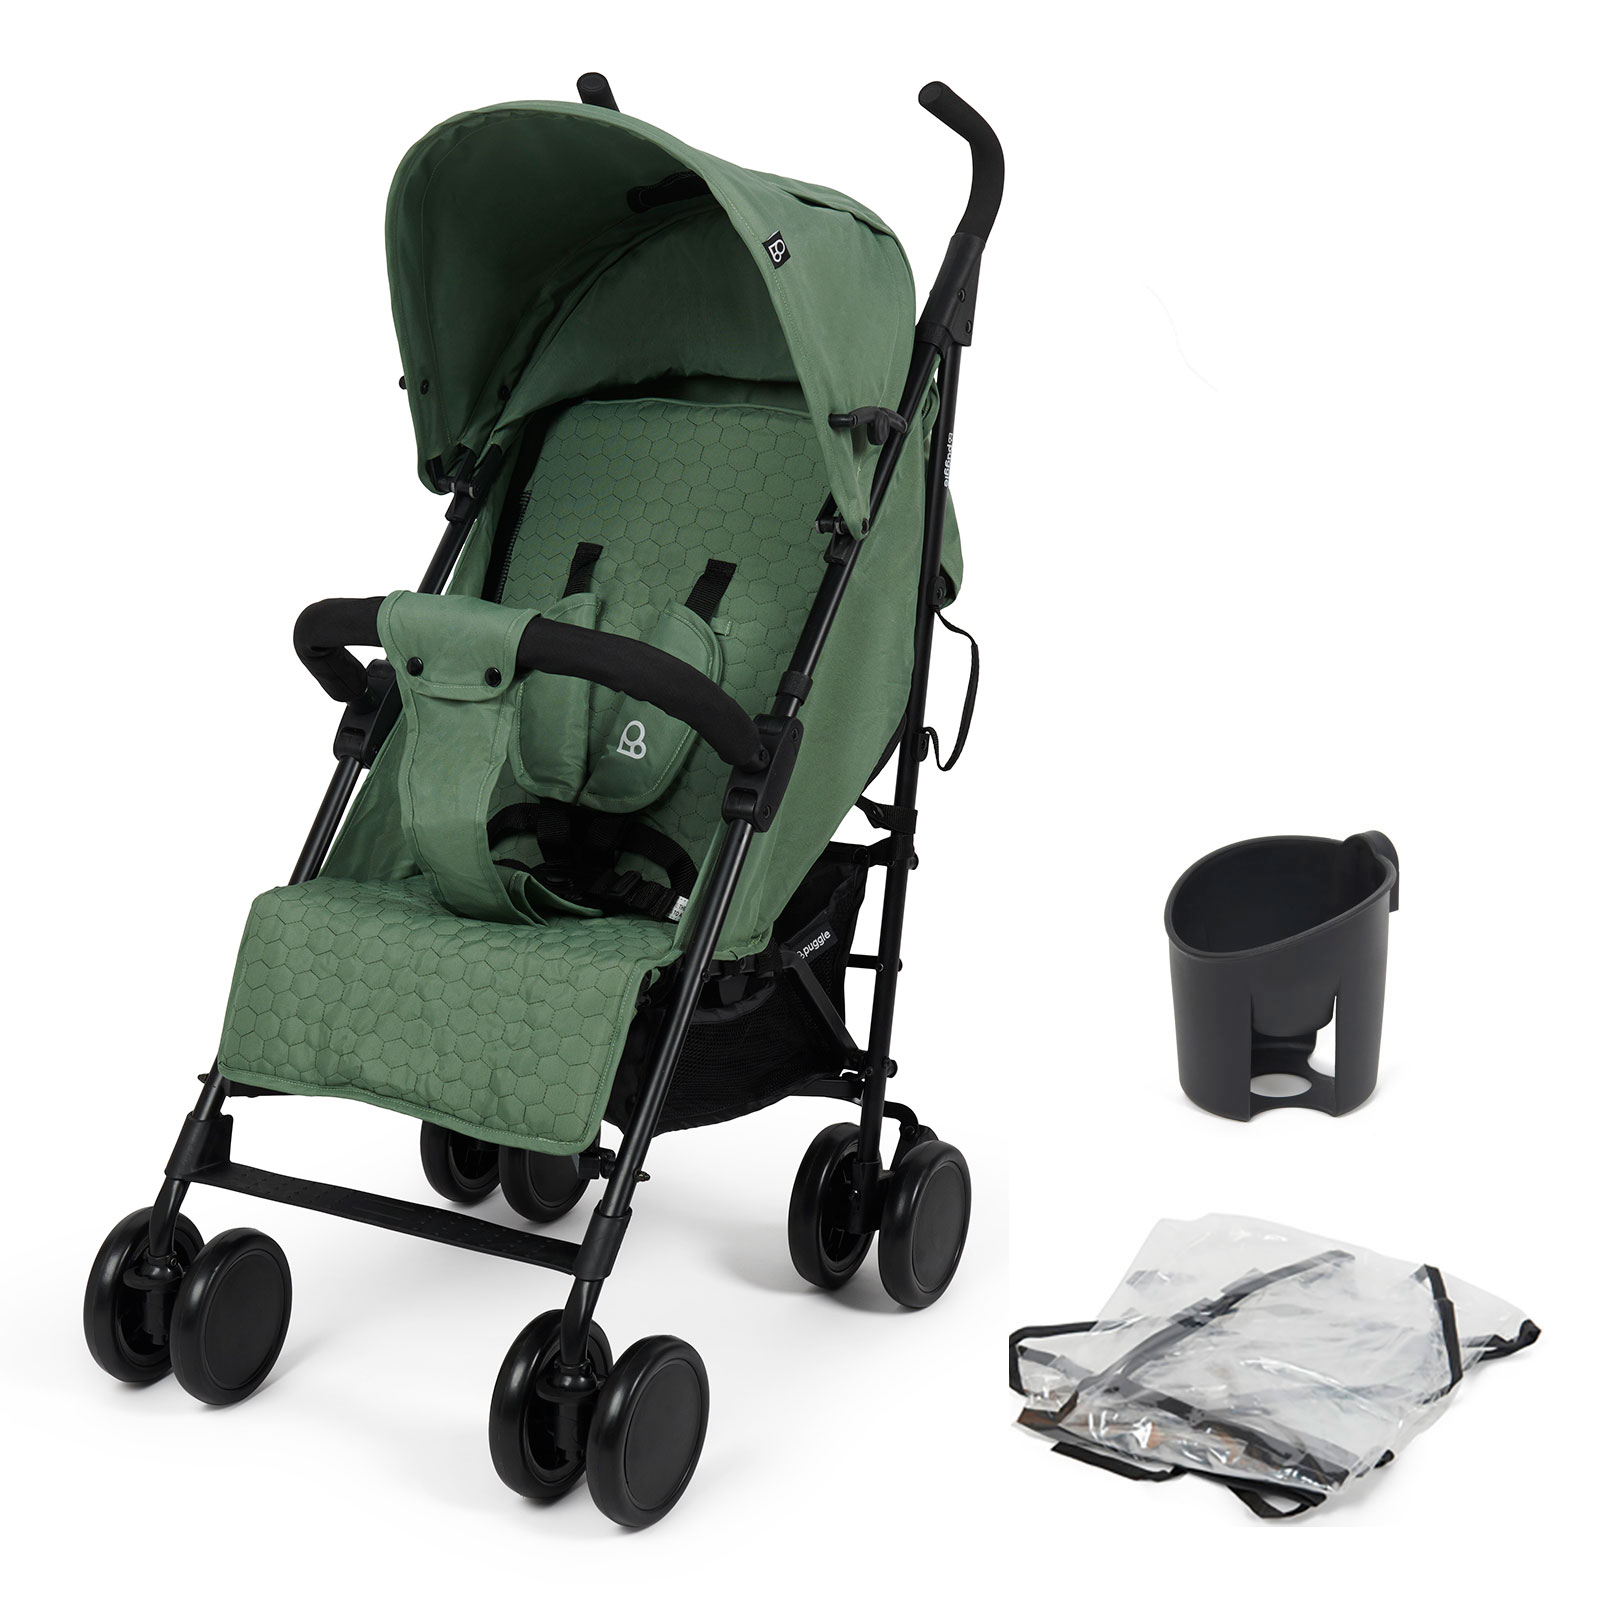 Puggle Litemax Pushchair Stroller with Raincover and Cup Holder - Sage Green